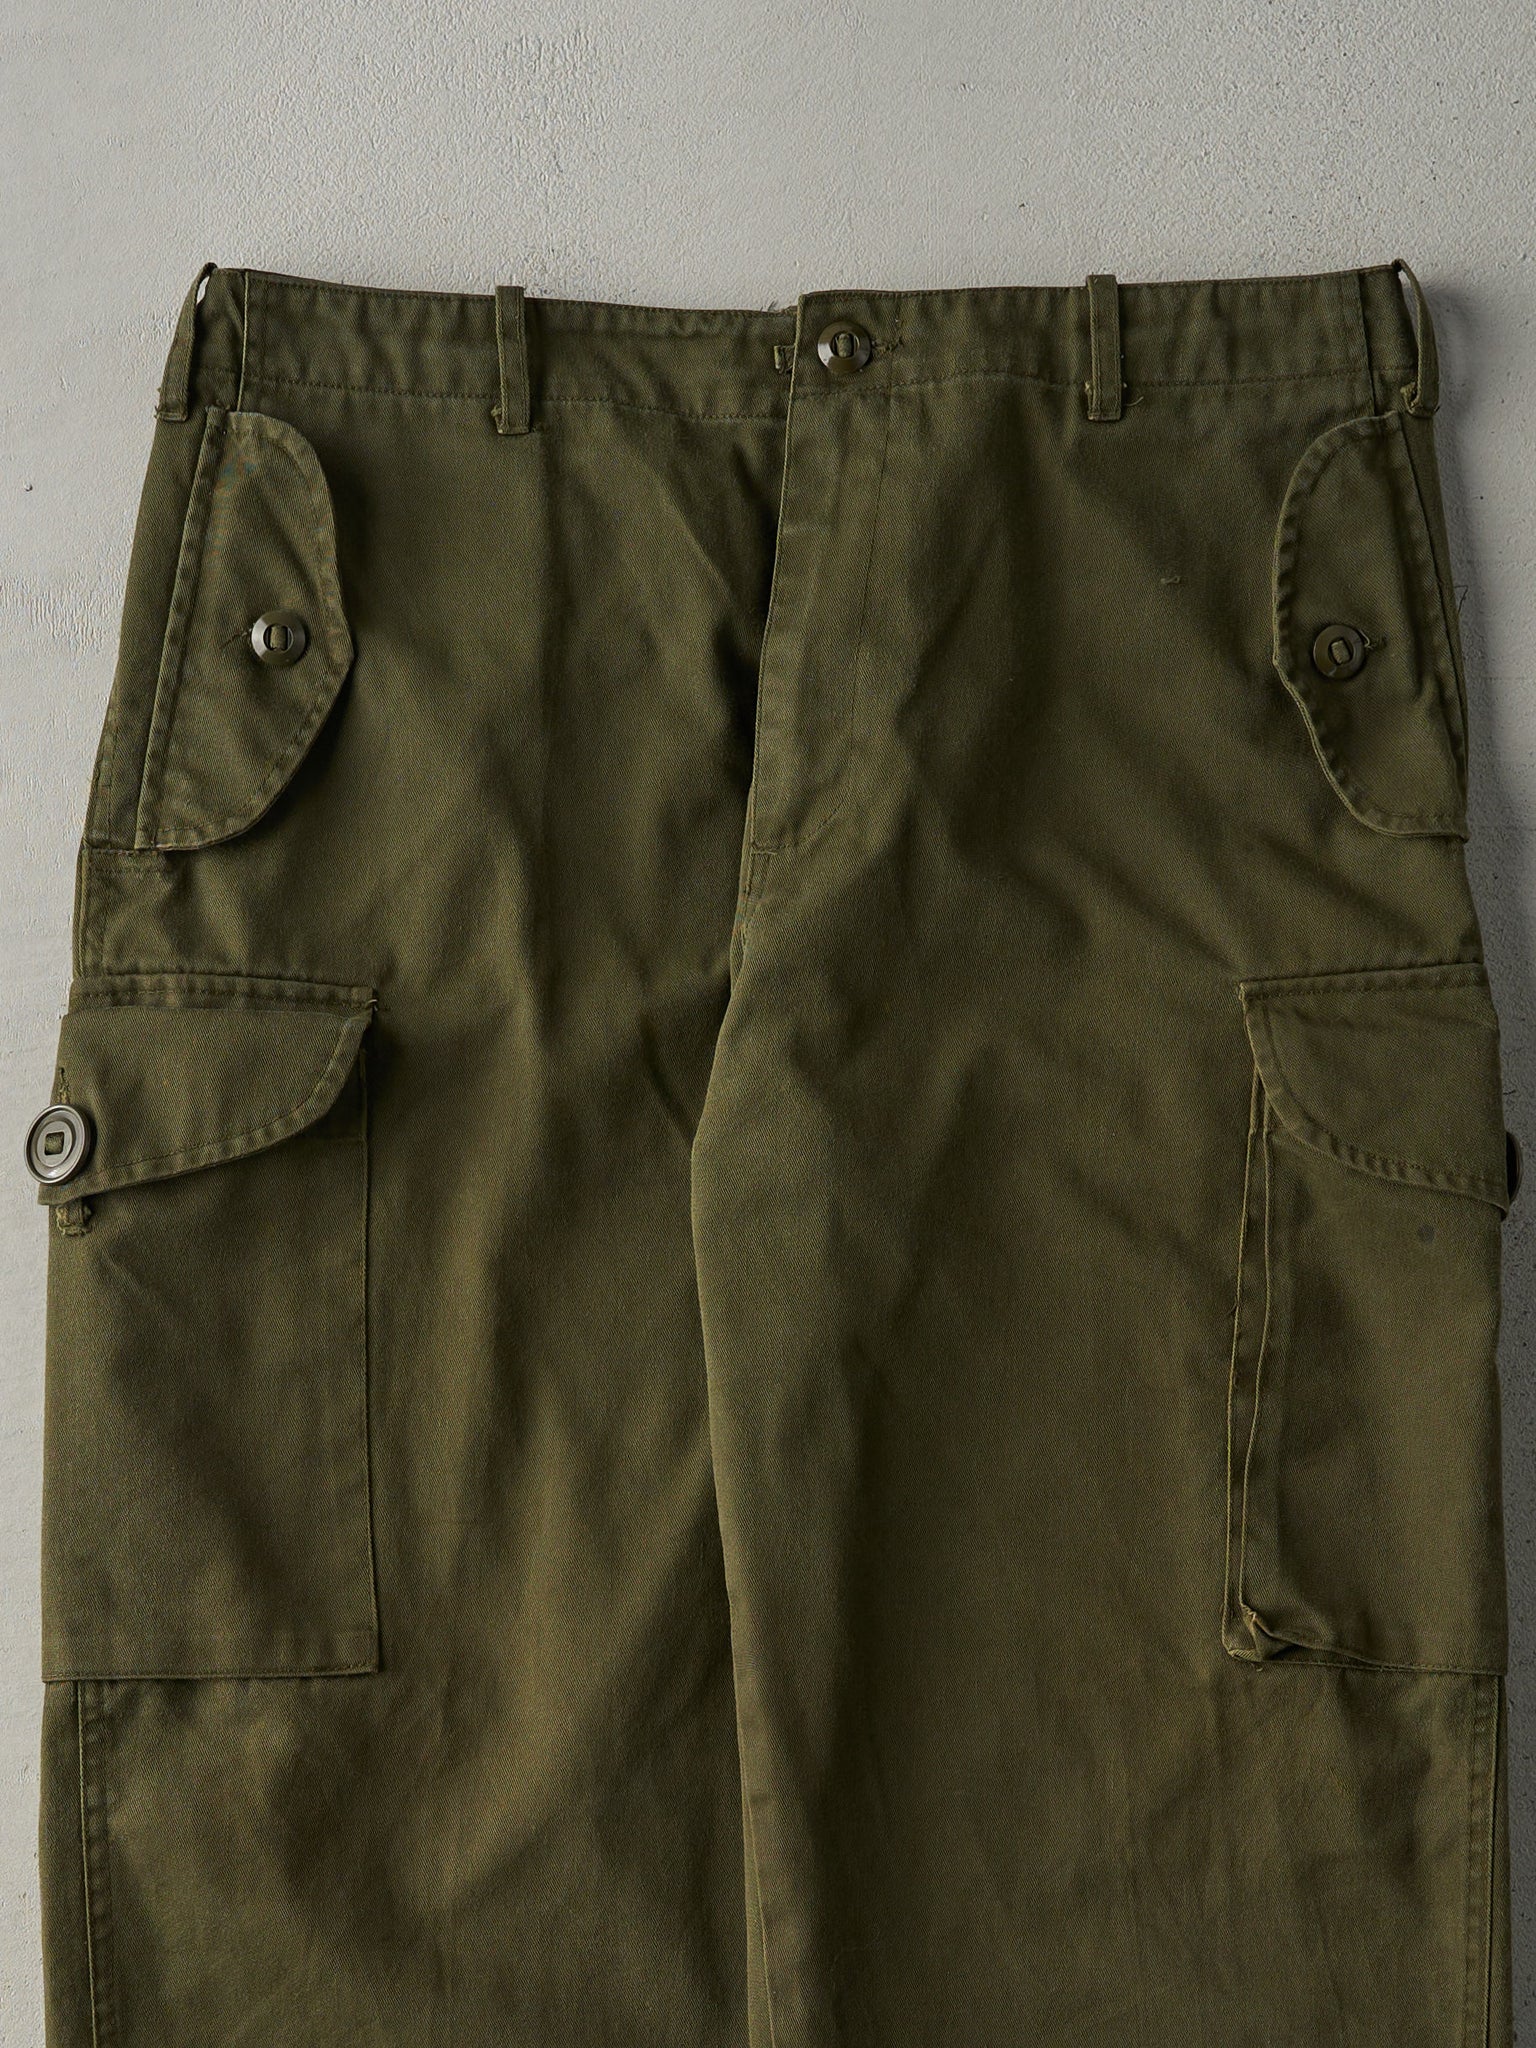 Vintage 90s Army Green Military Pants (36x30.5)